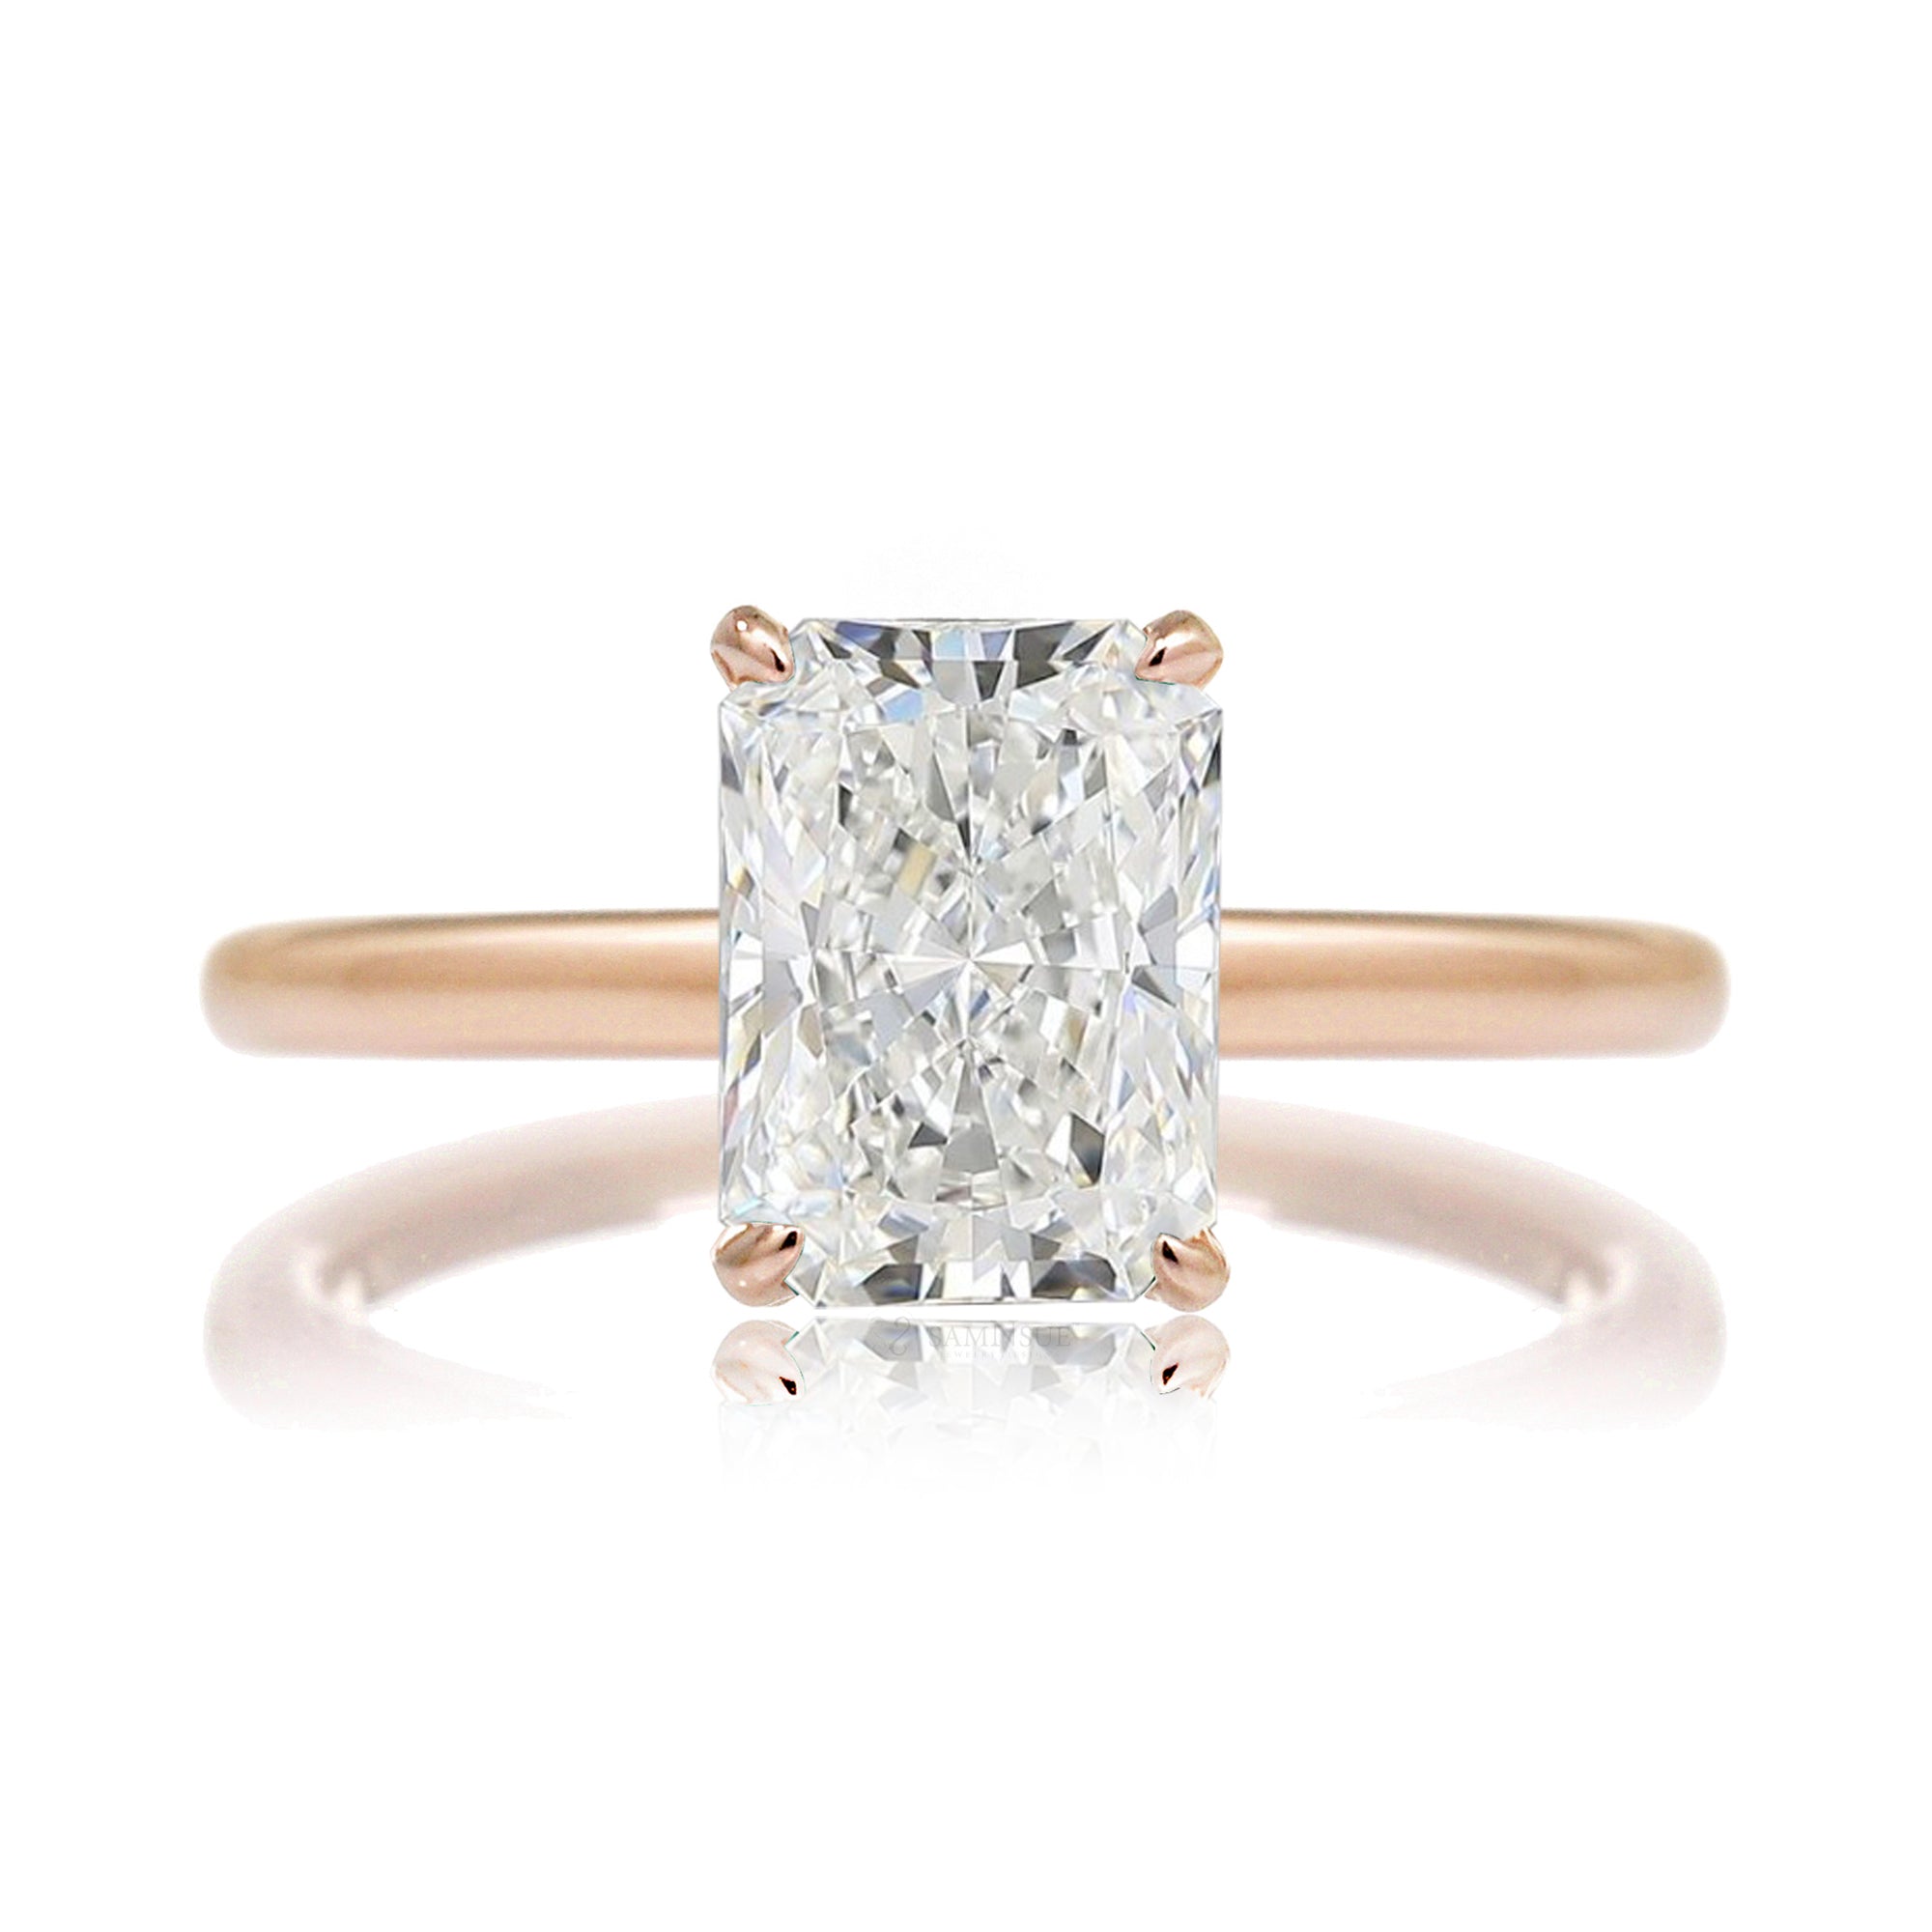 Radiant cut solitaire engagement ring diamond hidden halo solid band in rose gold